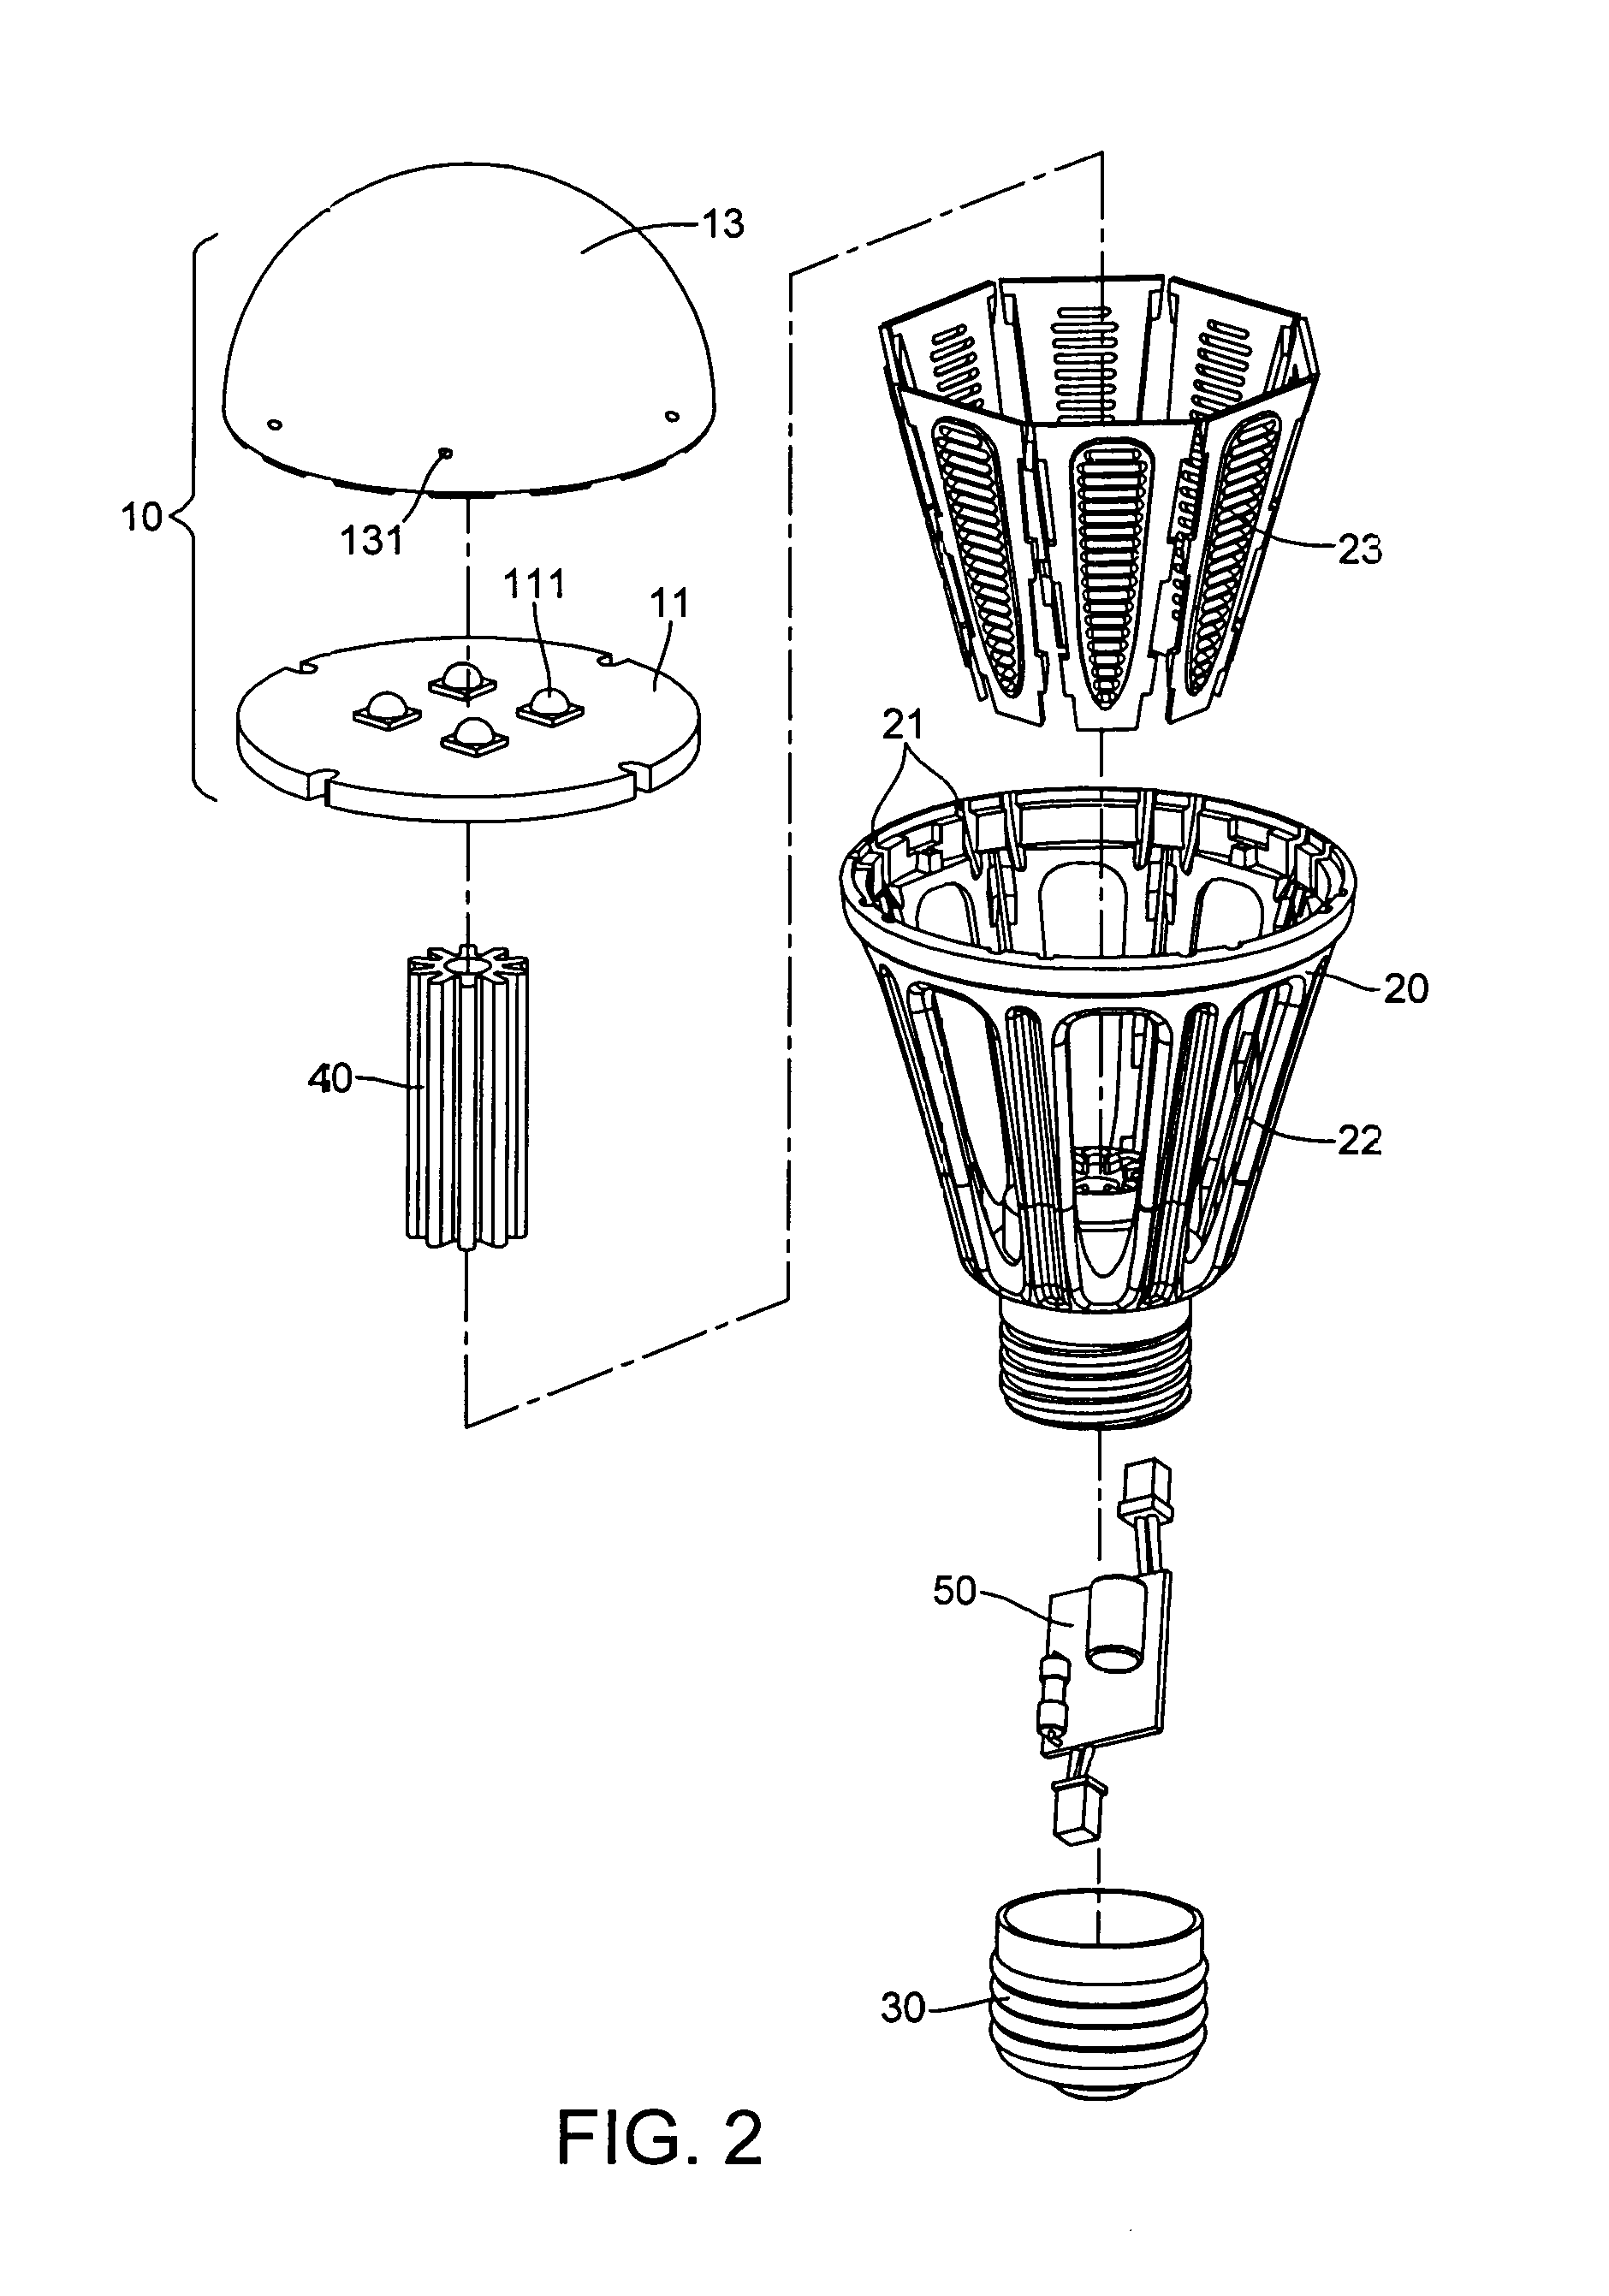 LED lamp structure having free convection cooling